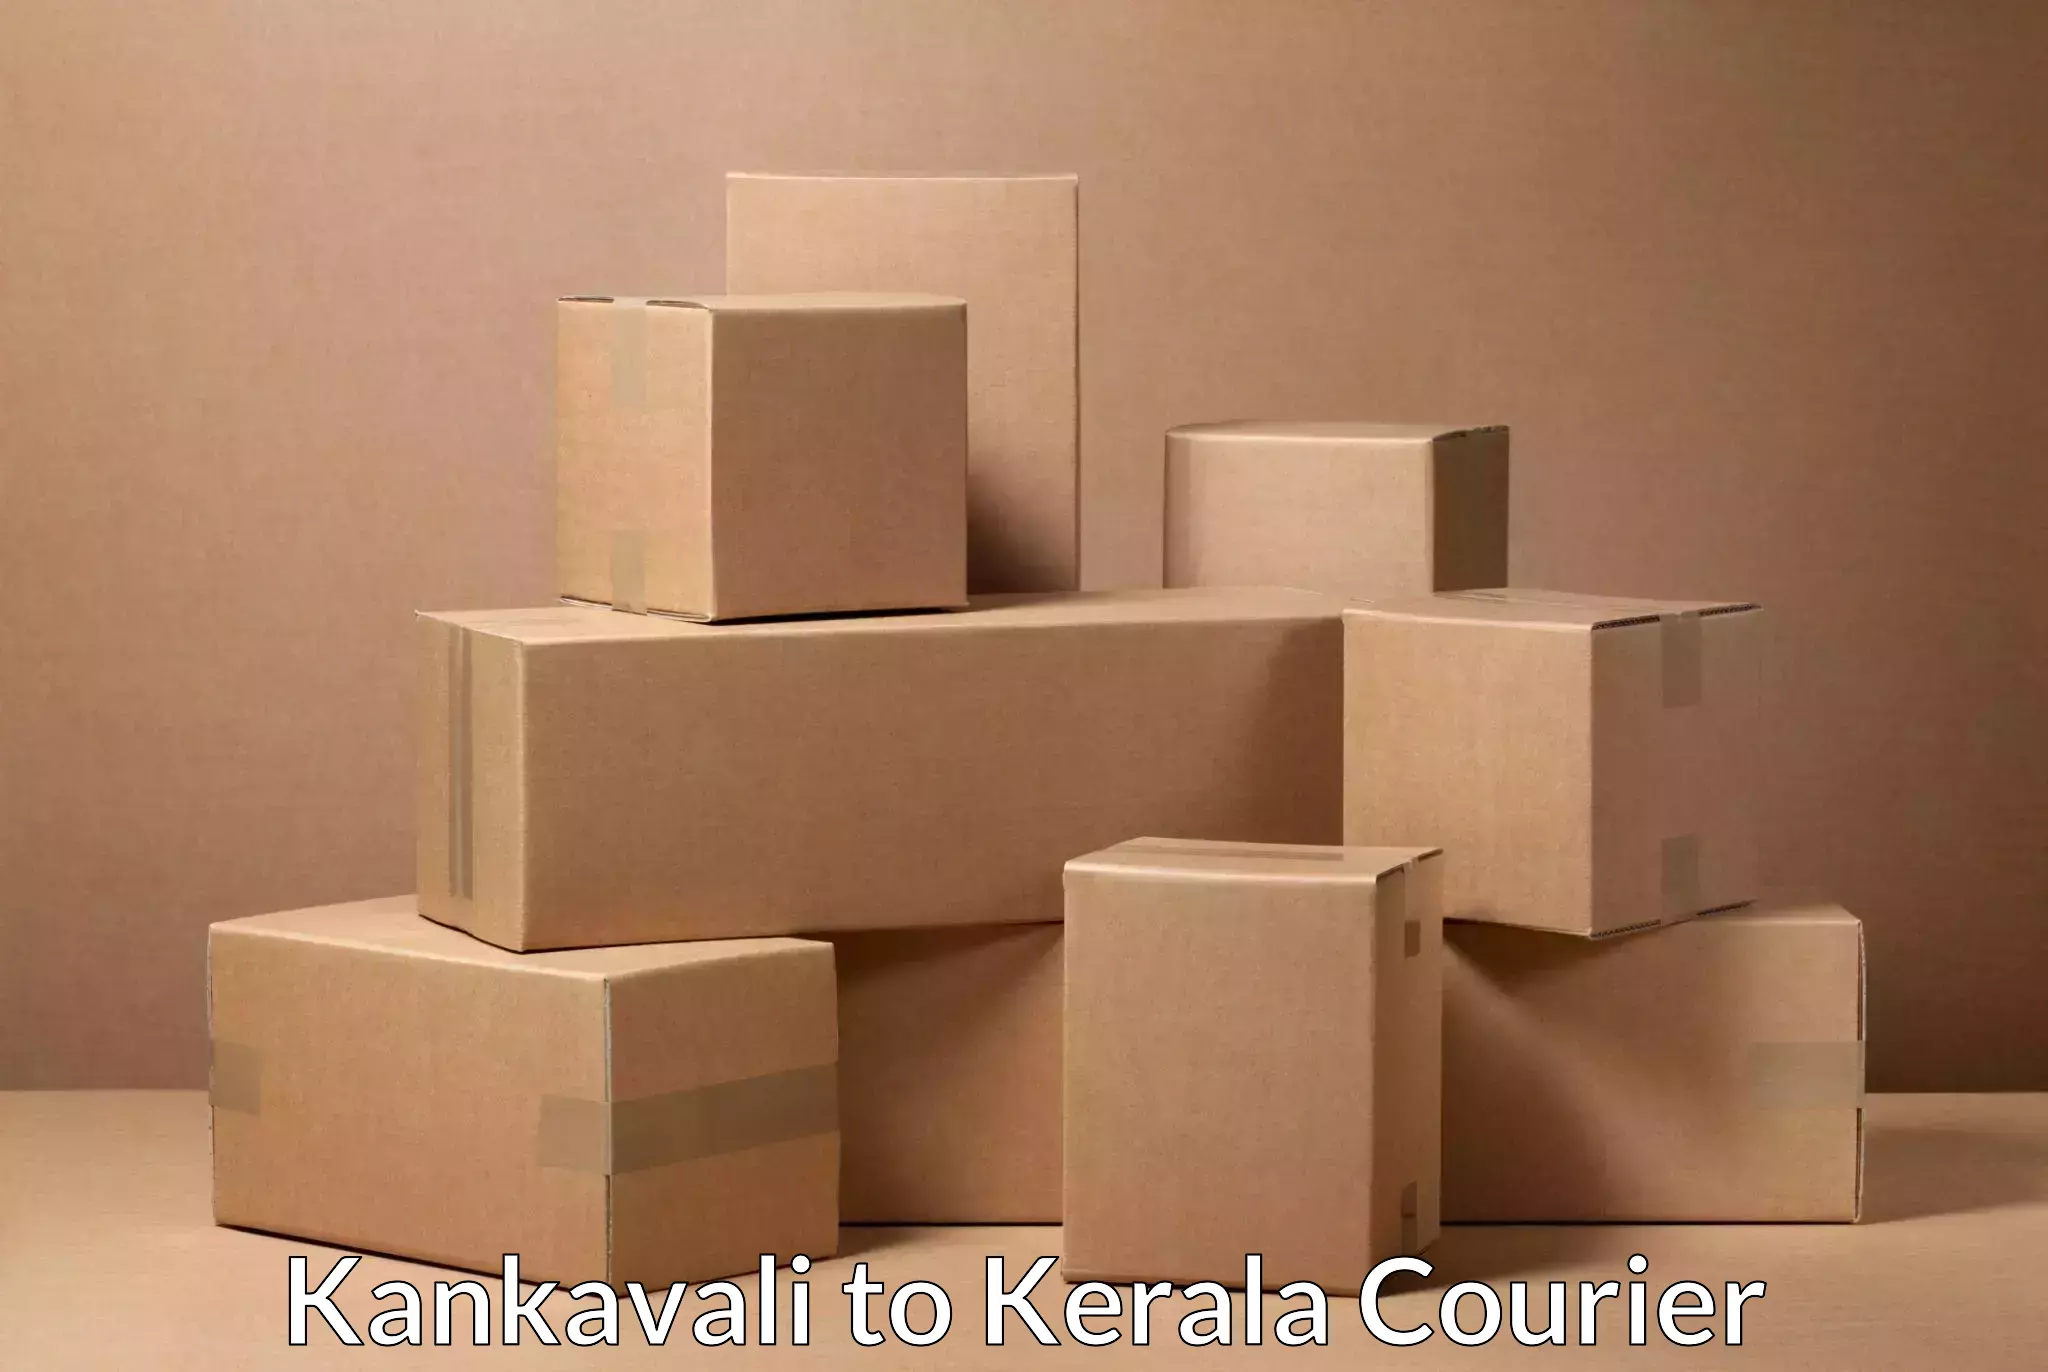 Parcel delivery automation Kankavali to Cochin Port Kochi